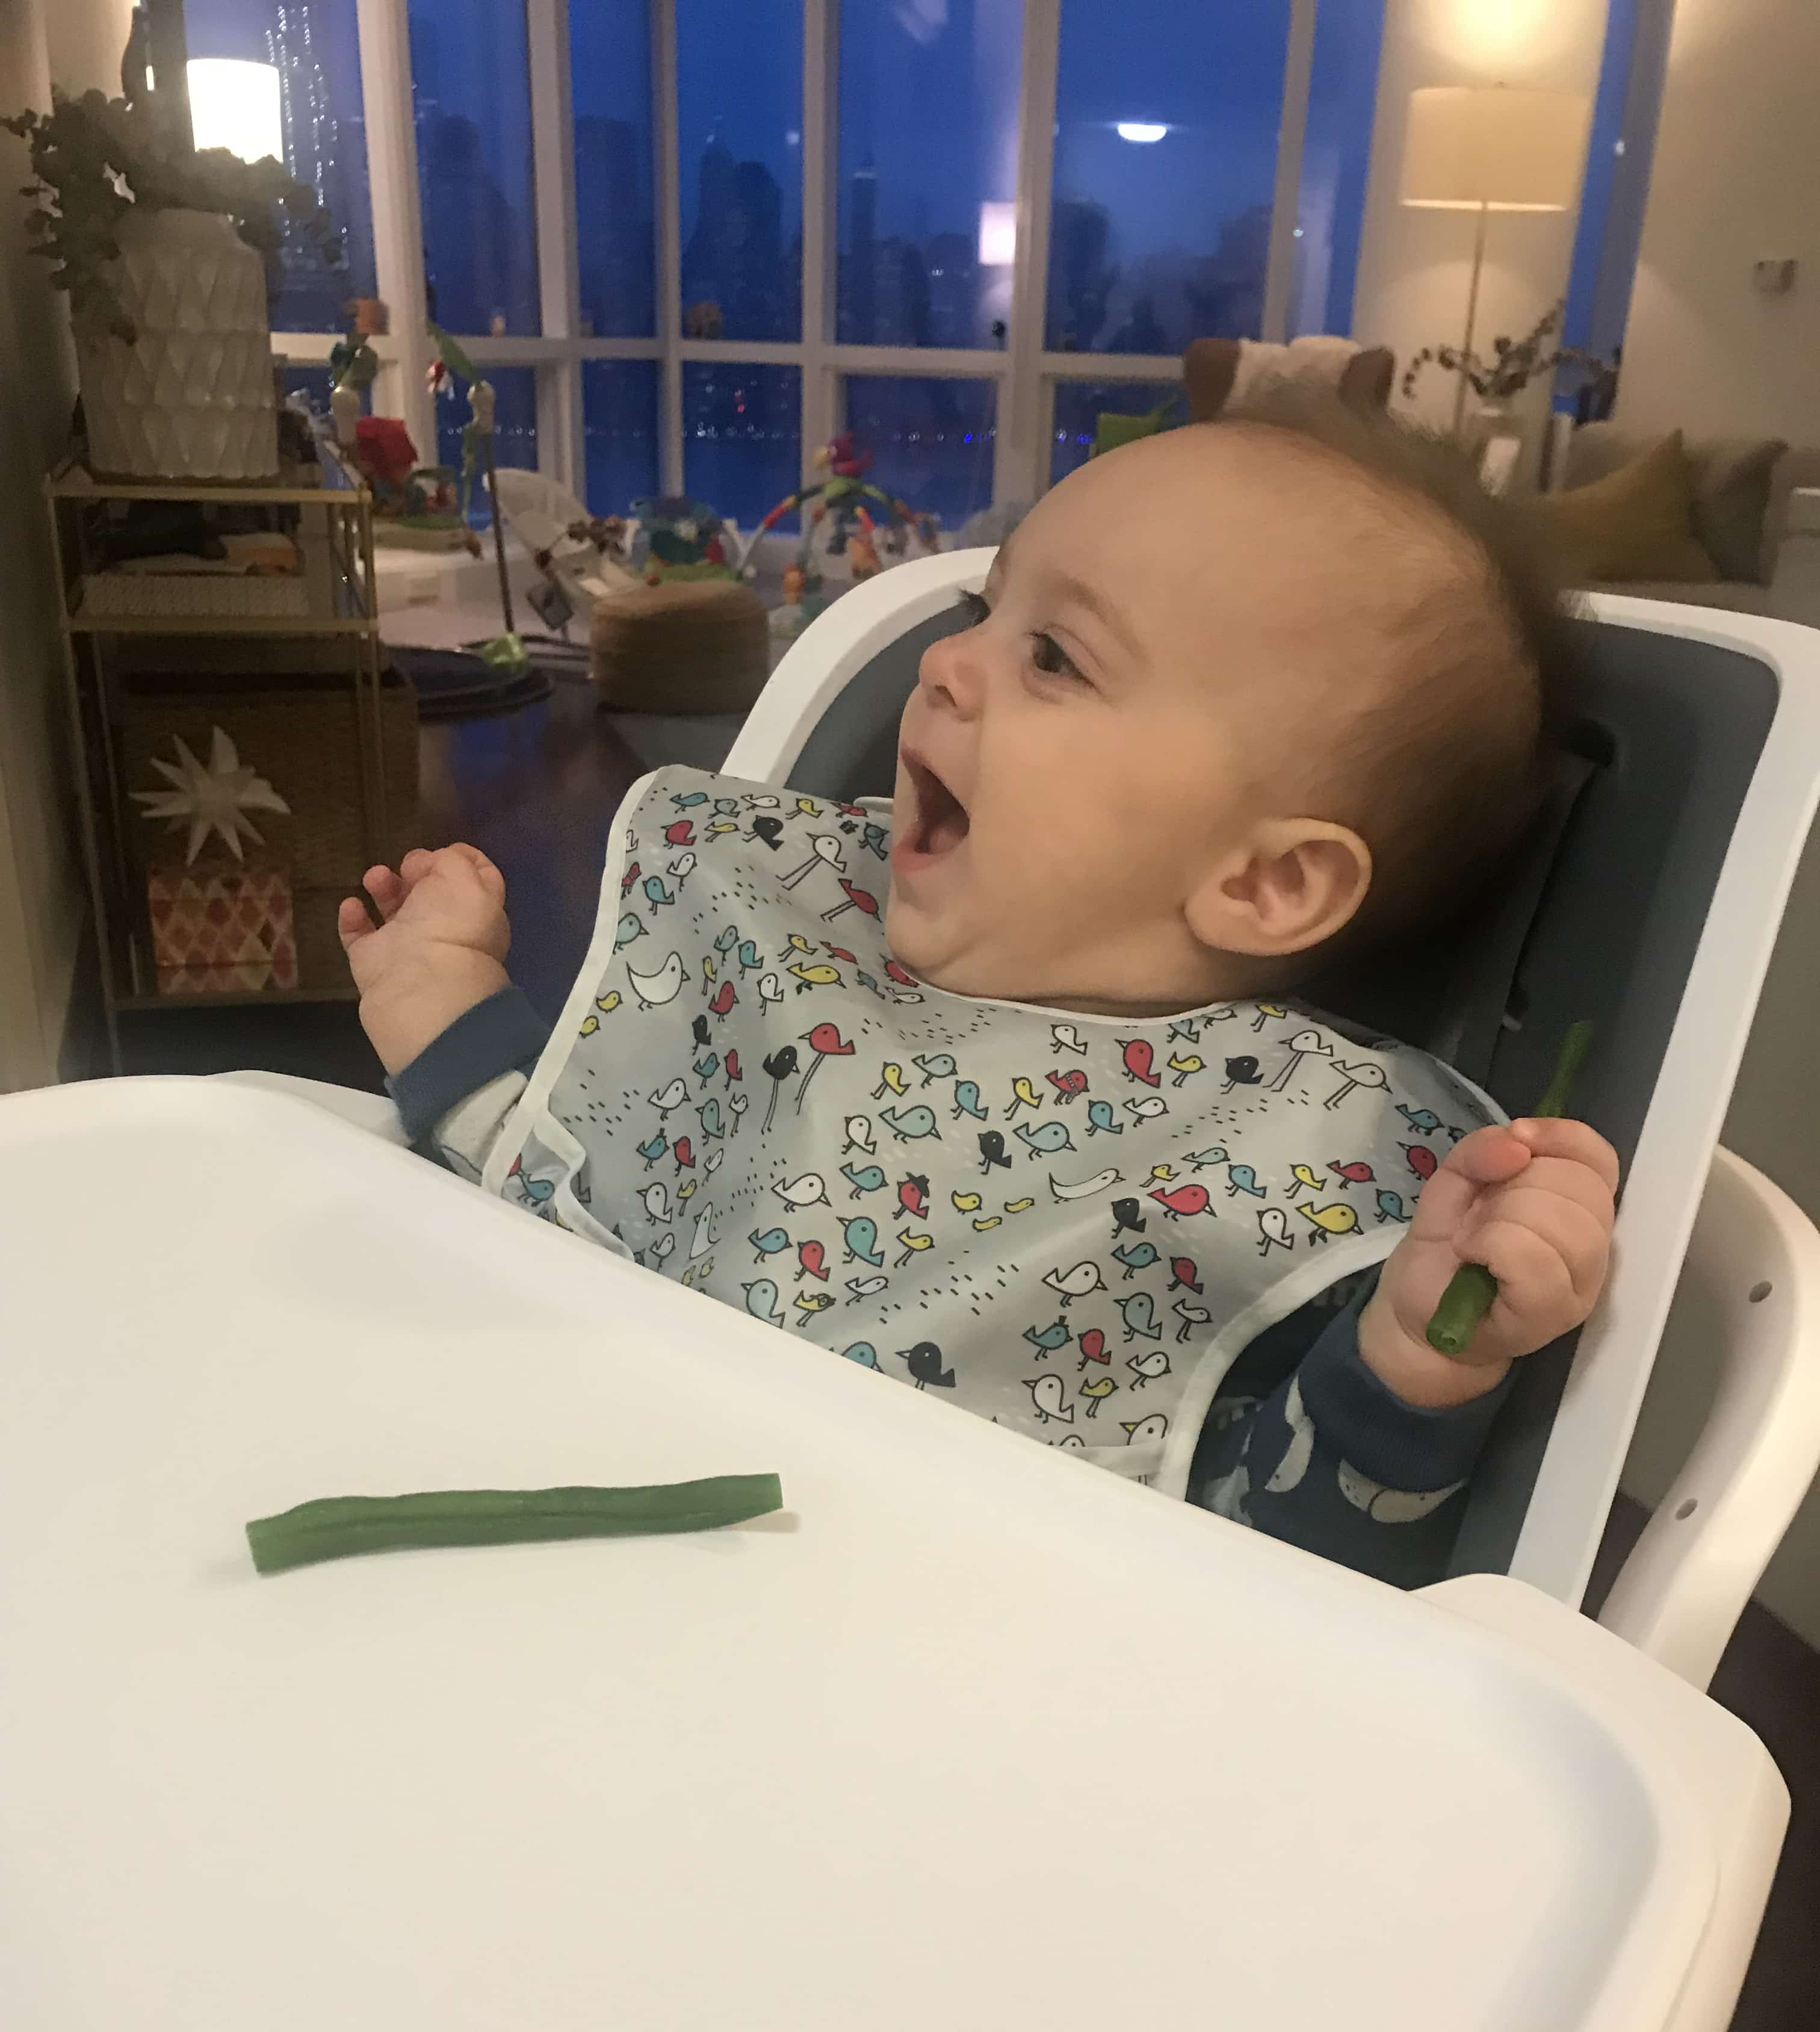 Inspiralized: Our first week with baby led weaning